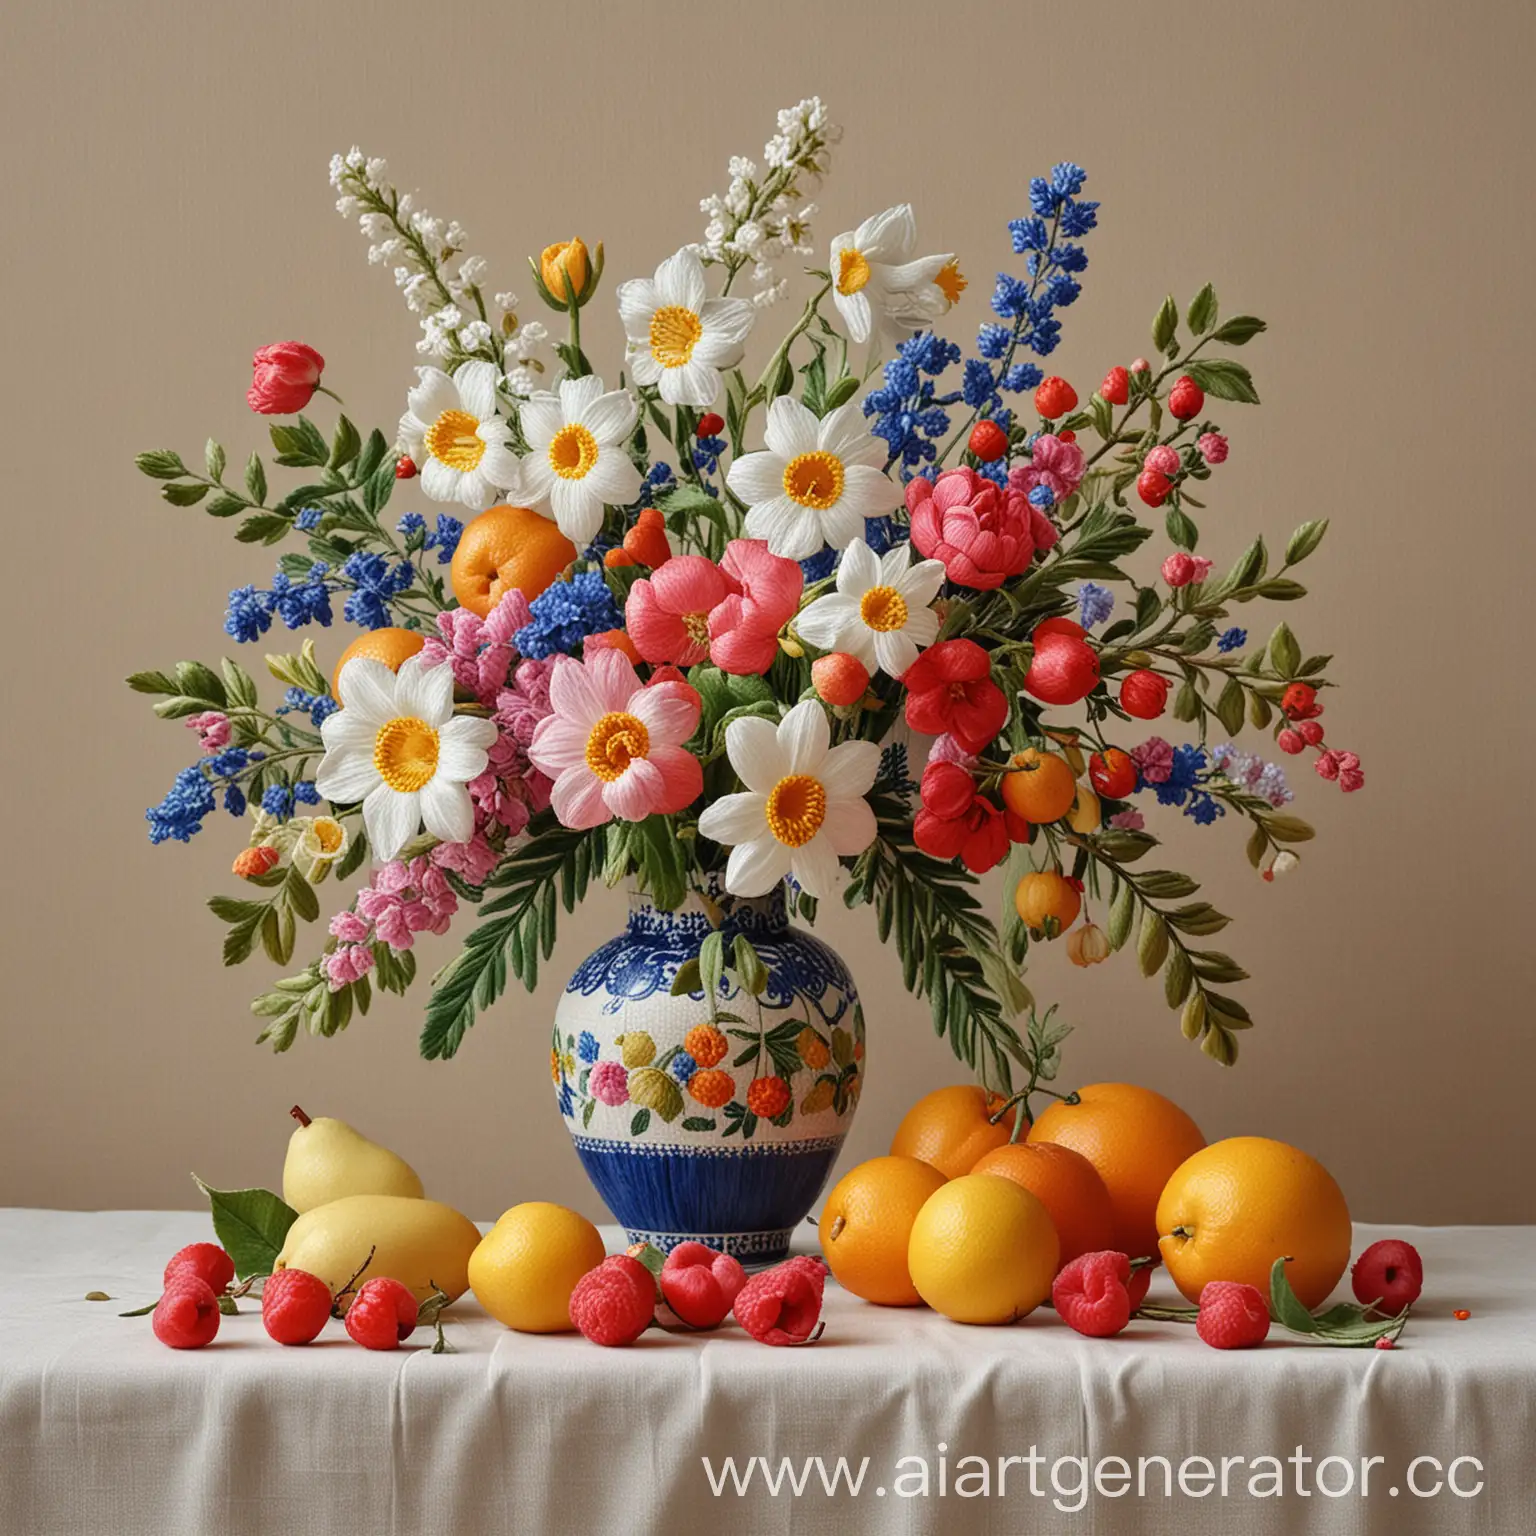 Vibrant-Still-Life-Spring-Flowers-Embroidery-Vase-and-Fruits